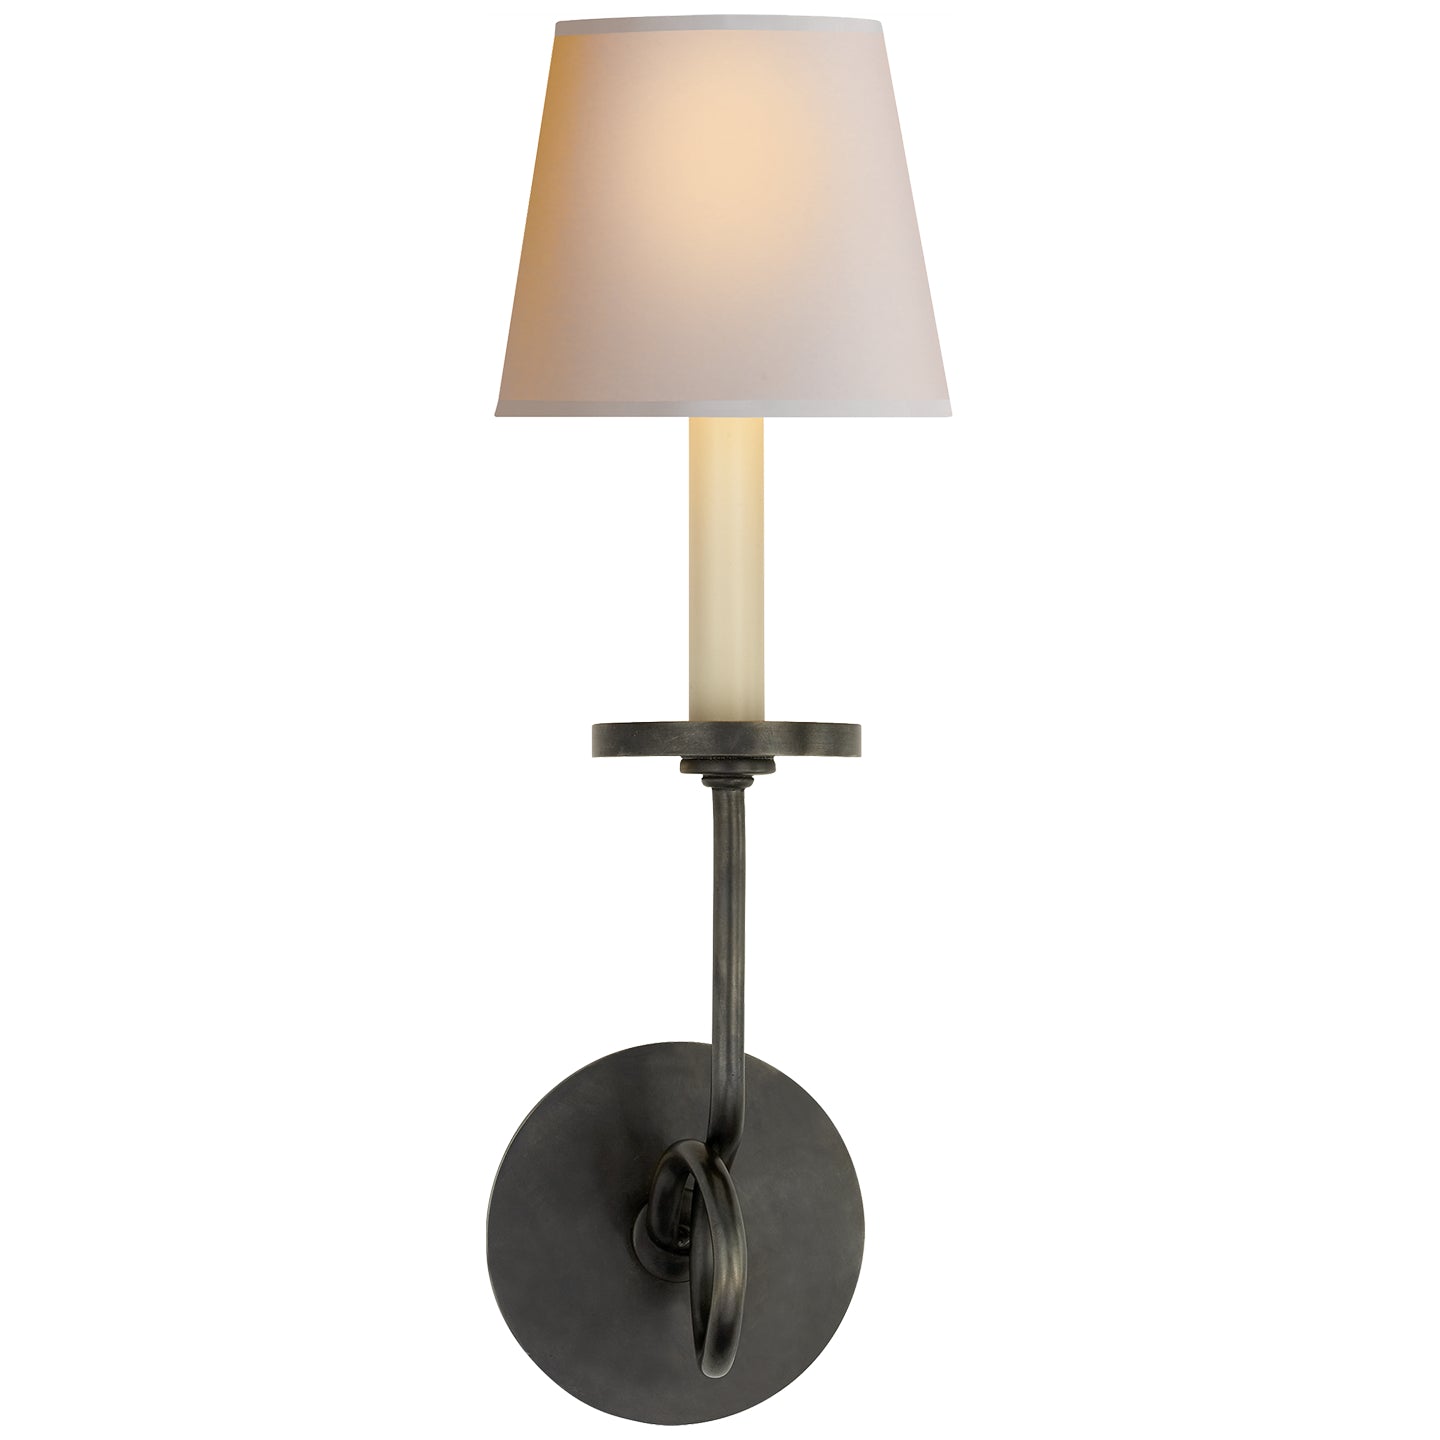 Load image into Gallery viewer, Visual Comfort Signature - CHD 1610BZ-NP - One Light Wall Sconce - Symmetric Twist - Bronze
